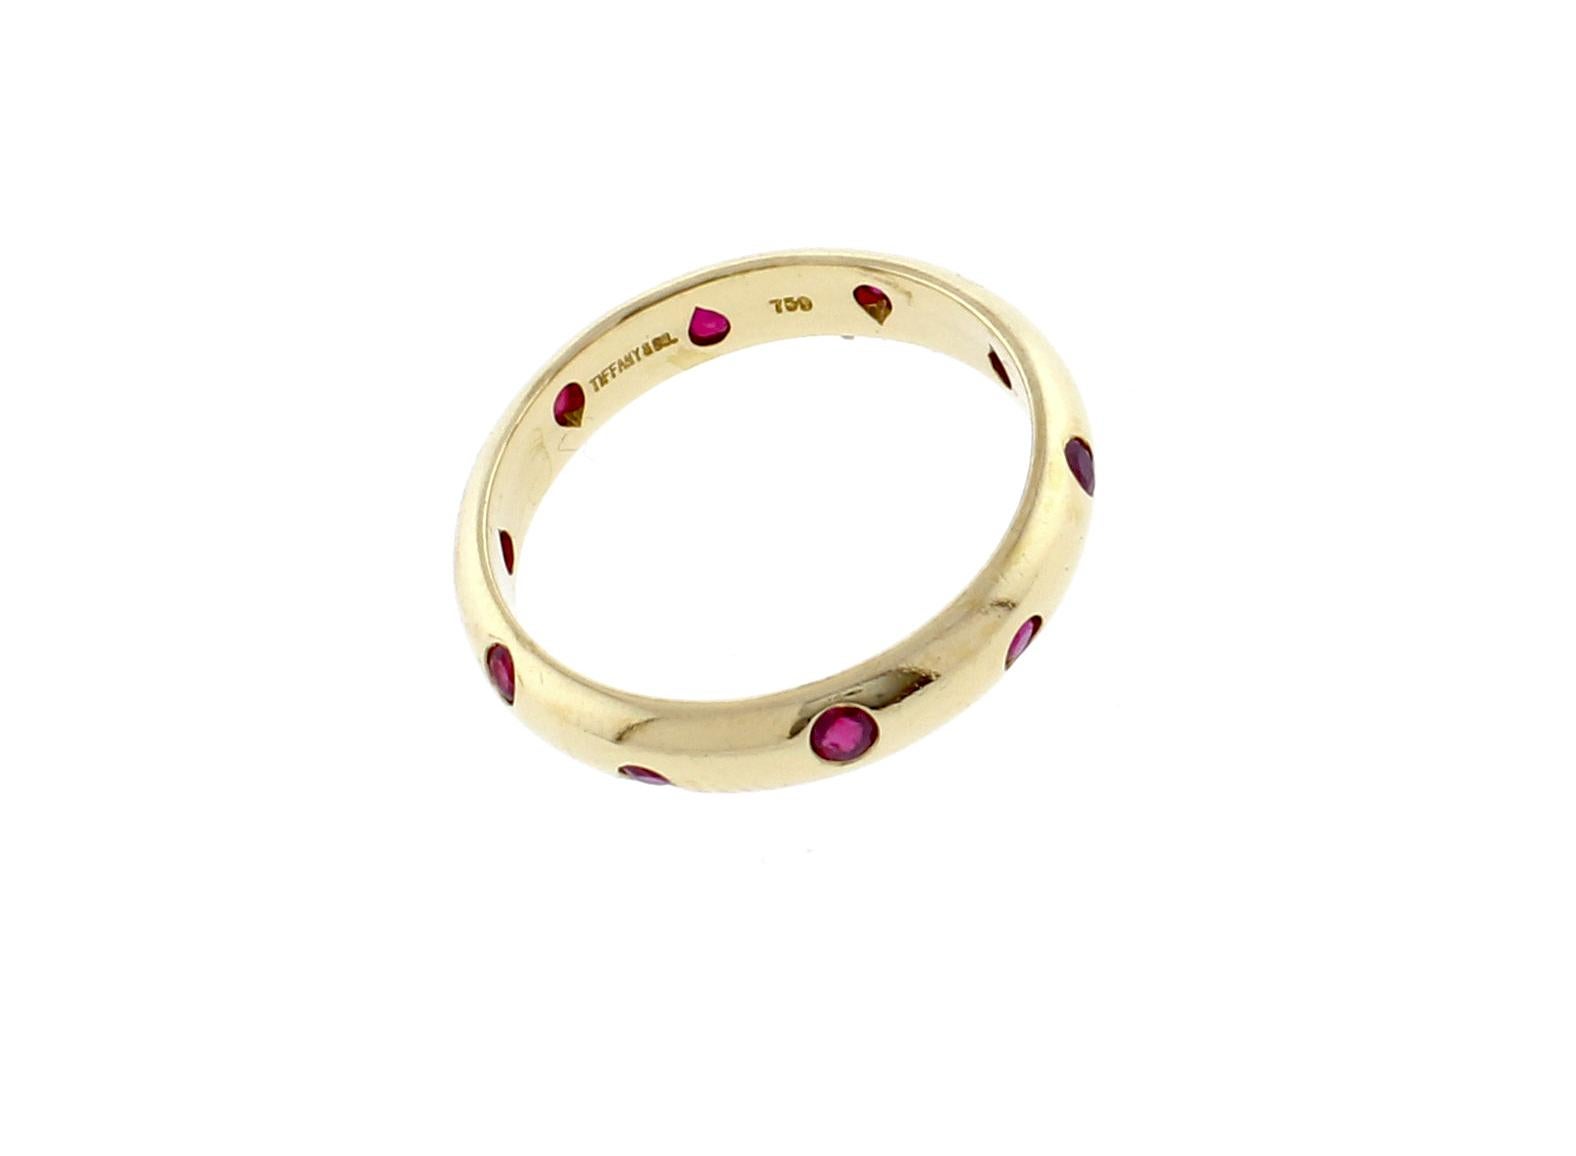 From Tiffany & Co.'s Etoile collection there 18 karat yellow gold ruby  Etoile ring., 4mm
 ♦ Designer / Hallmarks: Tiffany & Co
♦ Metal: 18 karat, 
♦ Gem stone: Ruby
♦ Design Era: Contemporary
♦ Circa 2002 
♦ Size: 8 ½
♦ Weight 5.1 grams
♦